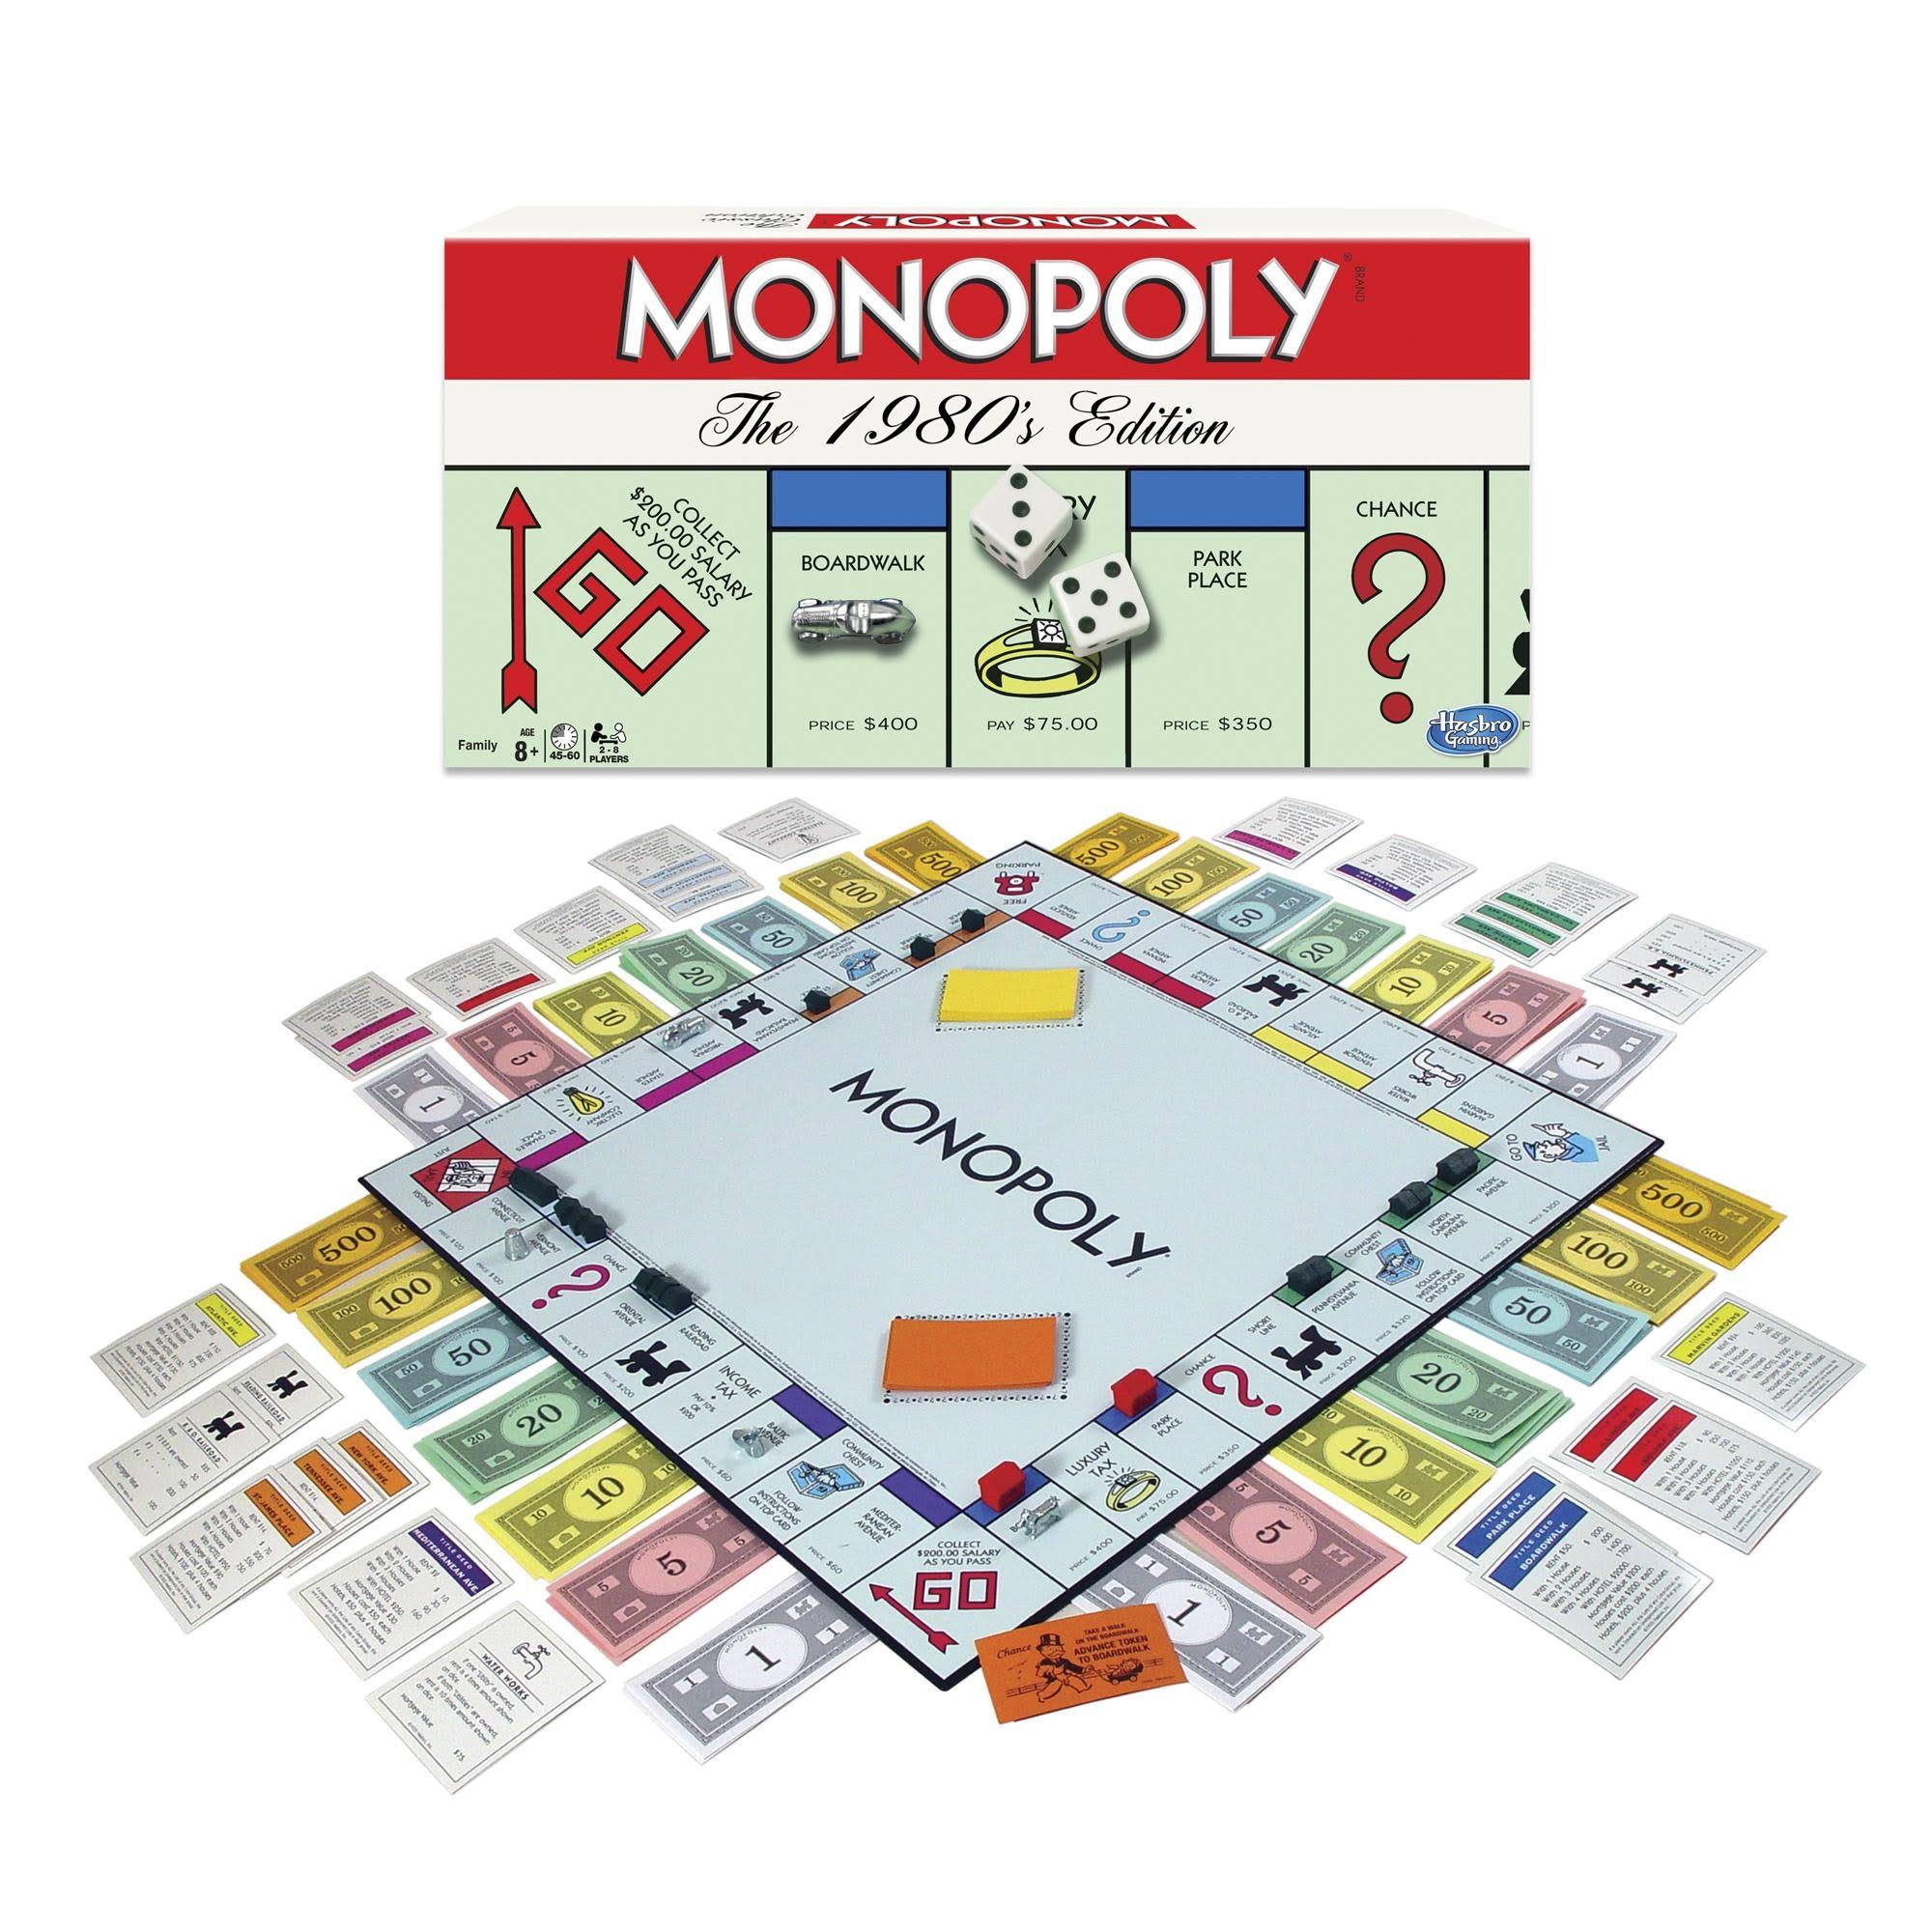 Monopoly The Classic Edition